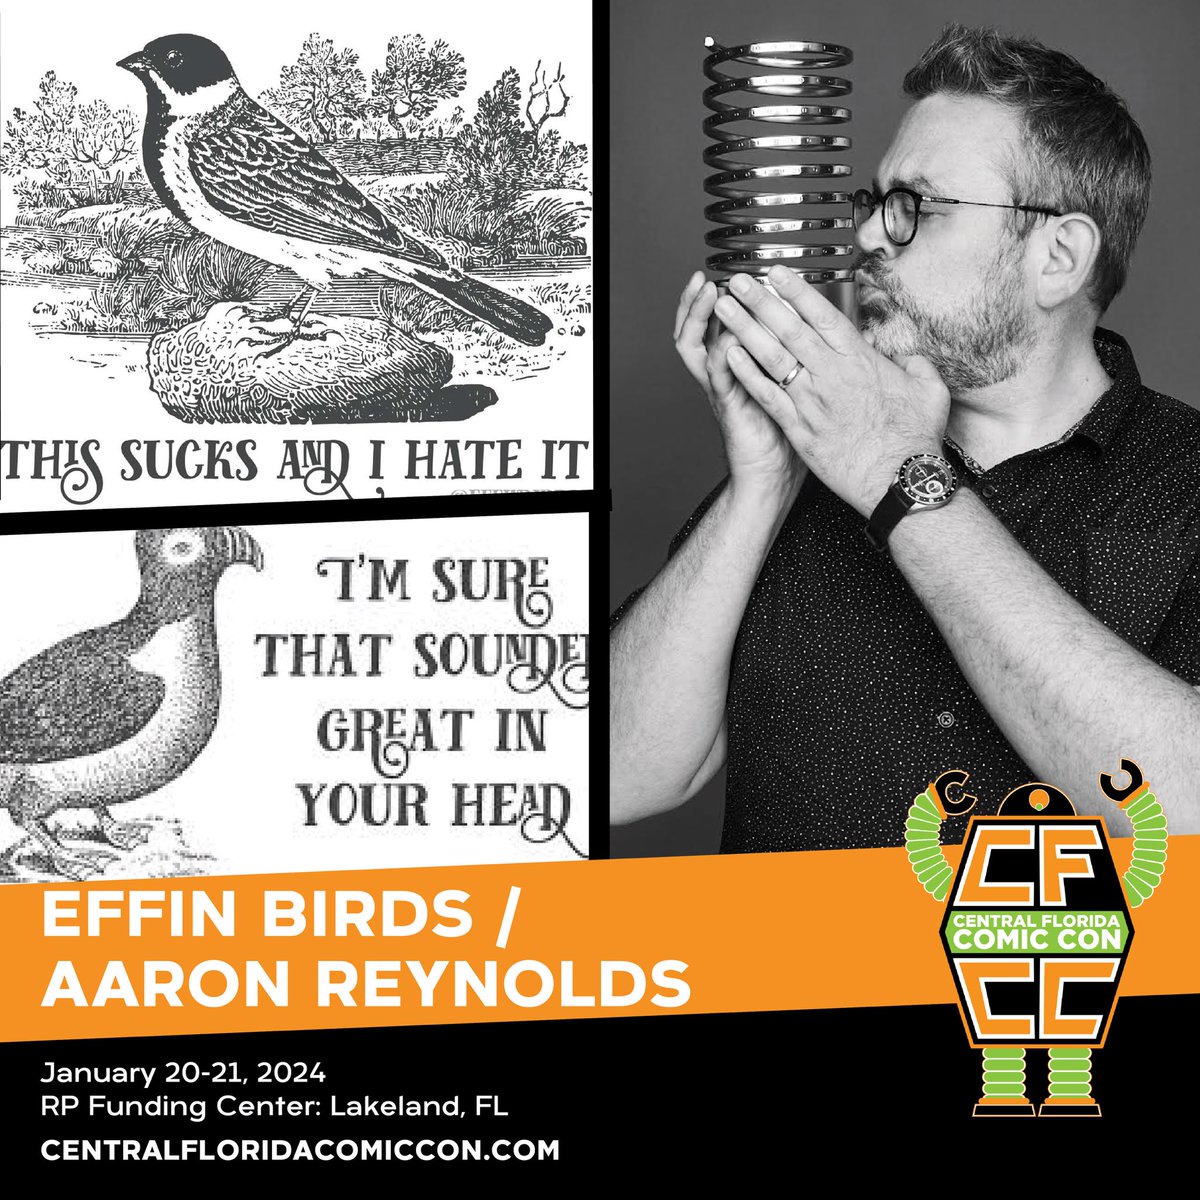 Multi-time Webby Award Winner @aaronreynolds of @EffinBirds returns to Central Florida Comic Con, this January! 🎉 Central Florida Comic Con is January 20-21, 2024 at the RP Funding Center in Lakeland, FL! TICKETS >> centralfloridacomiccon.com